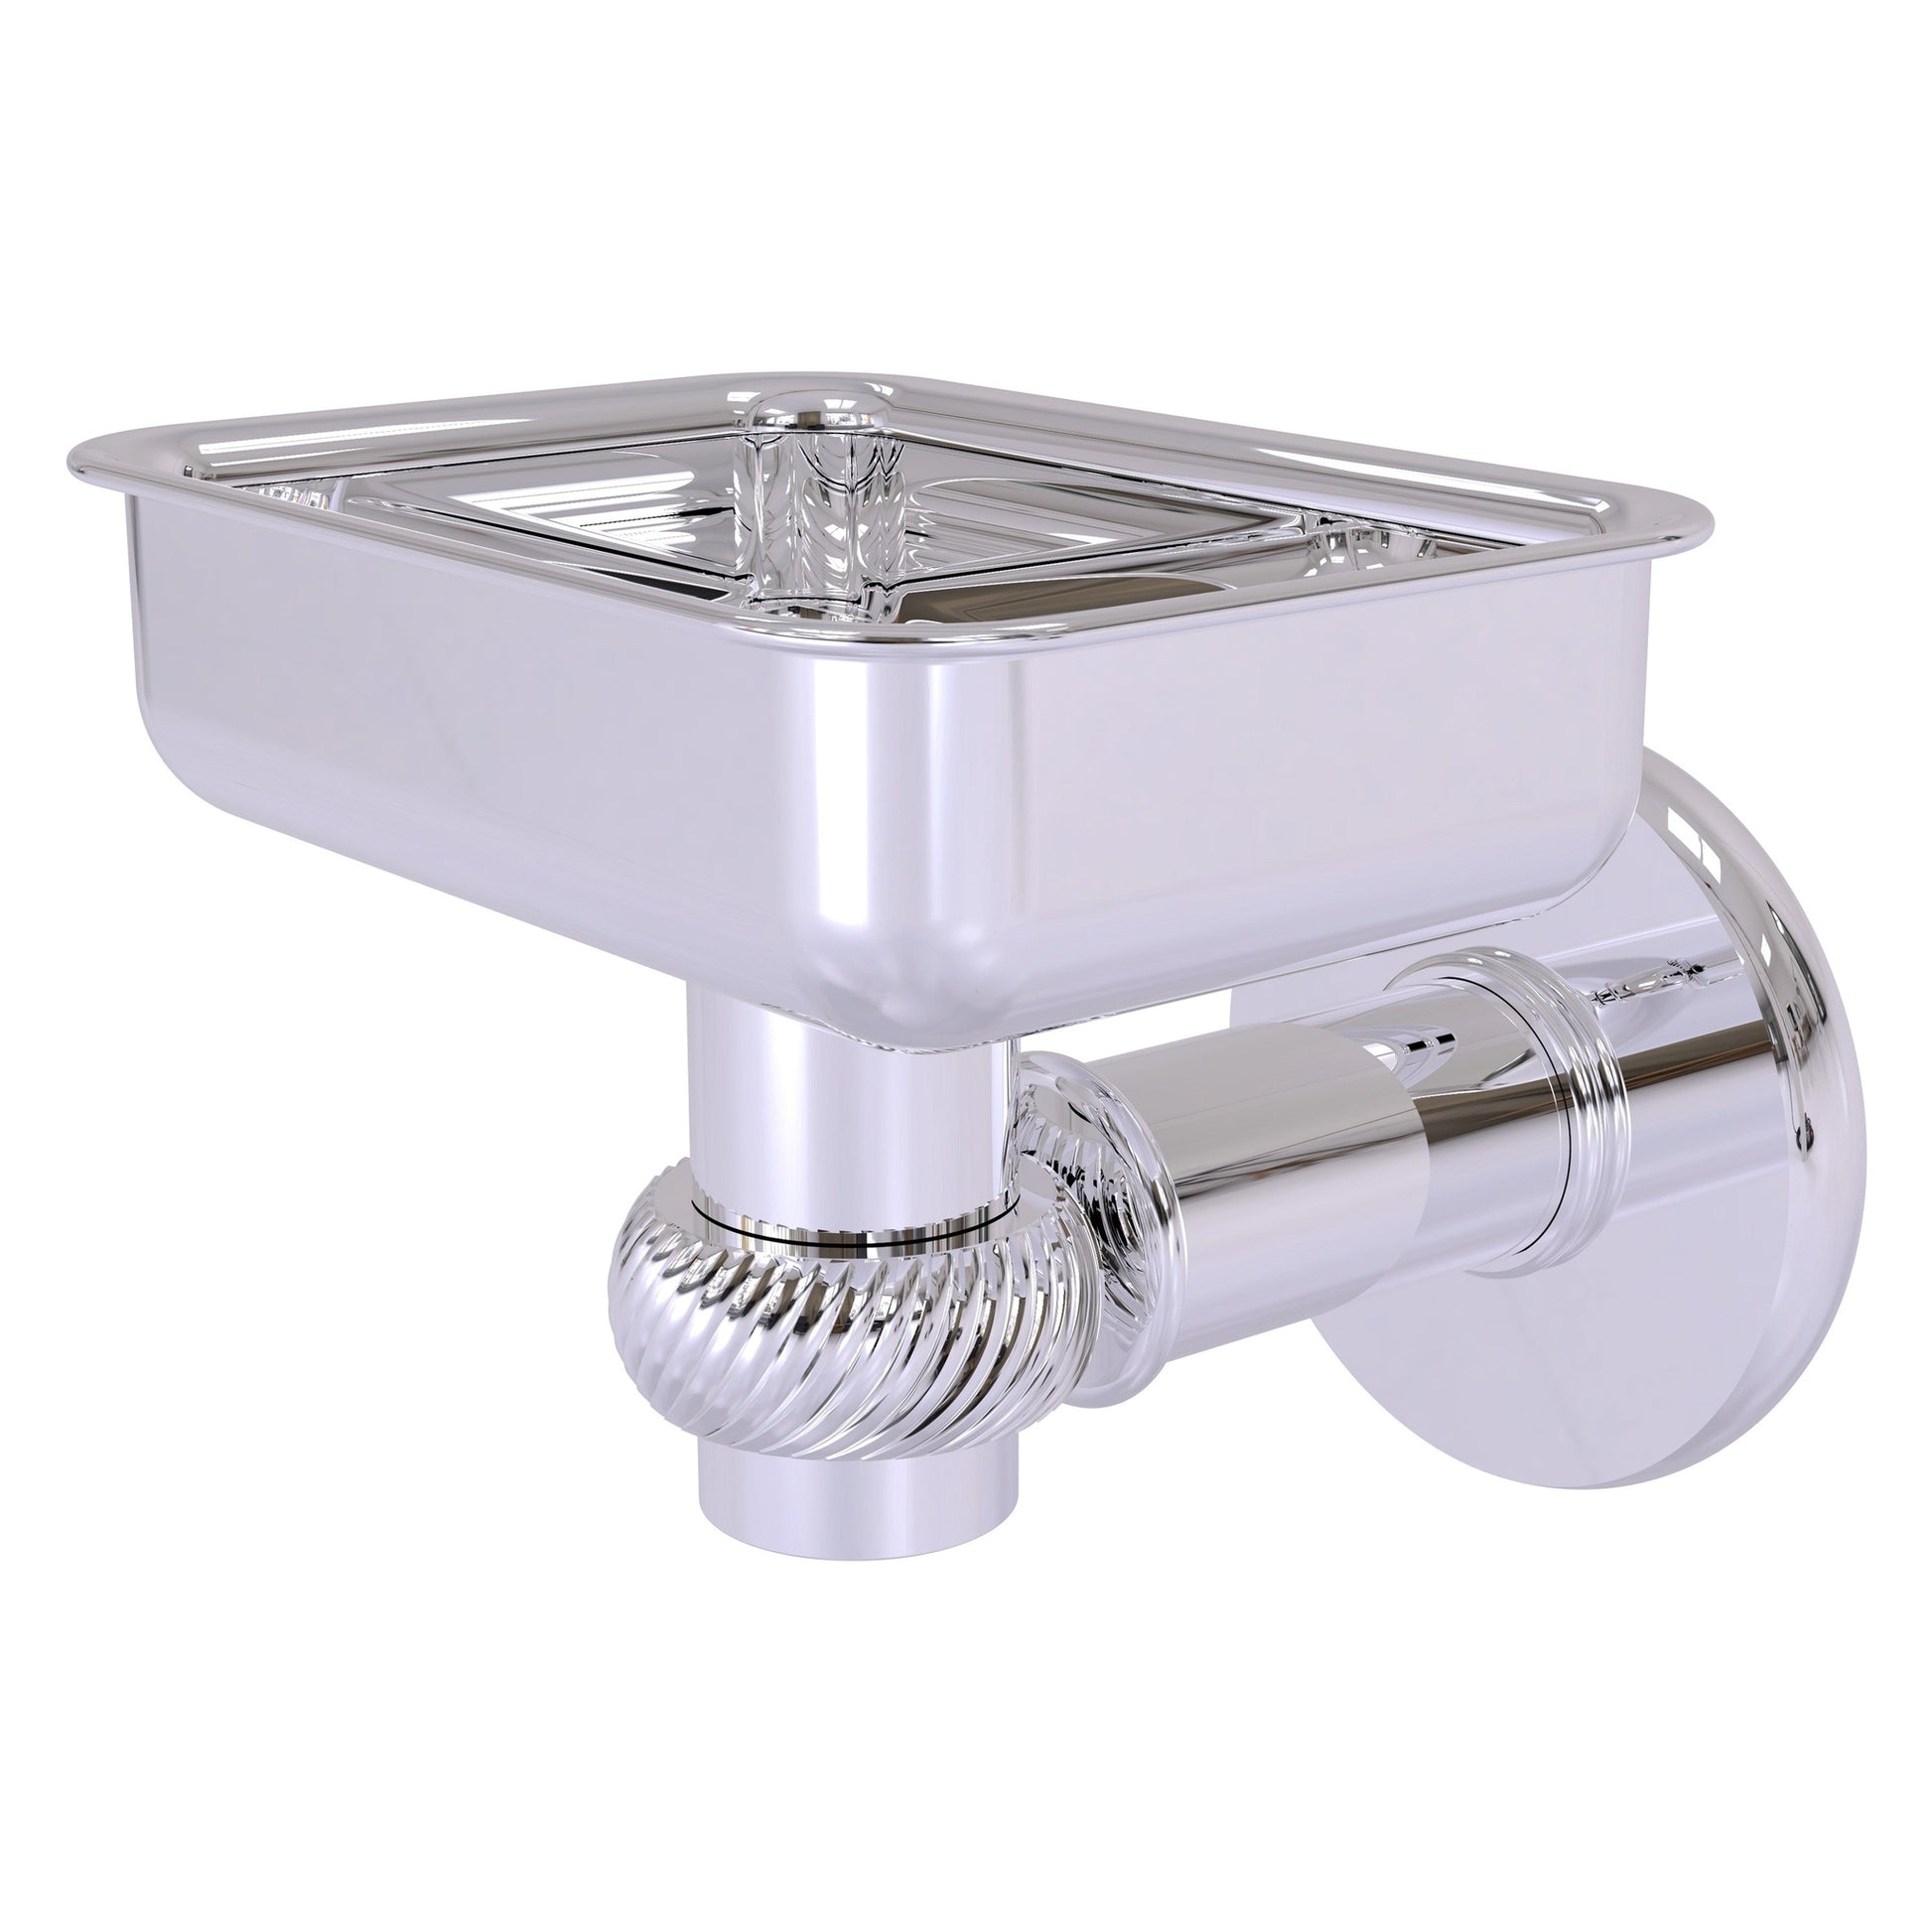 Allied Brass Continental 4.5" x 3.5" Polished Chrome Solid Brass Wall-Mounted Soap Dish Holder with Twist Accents